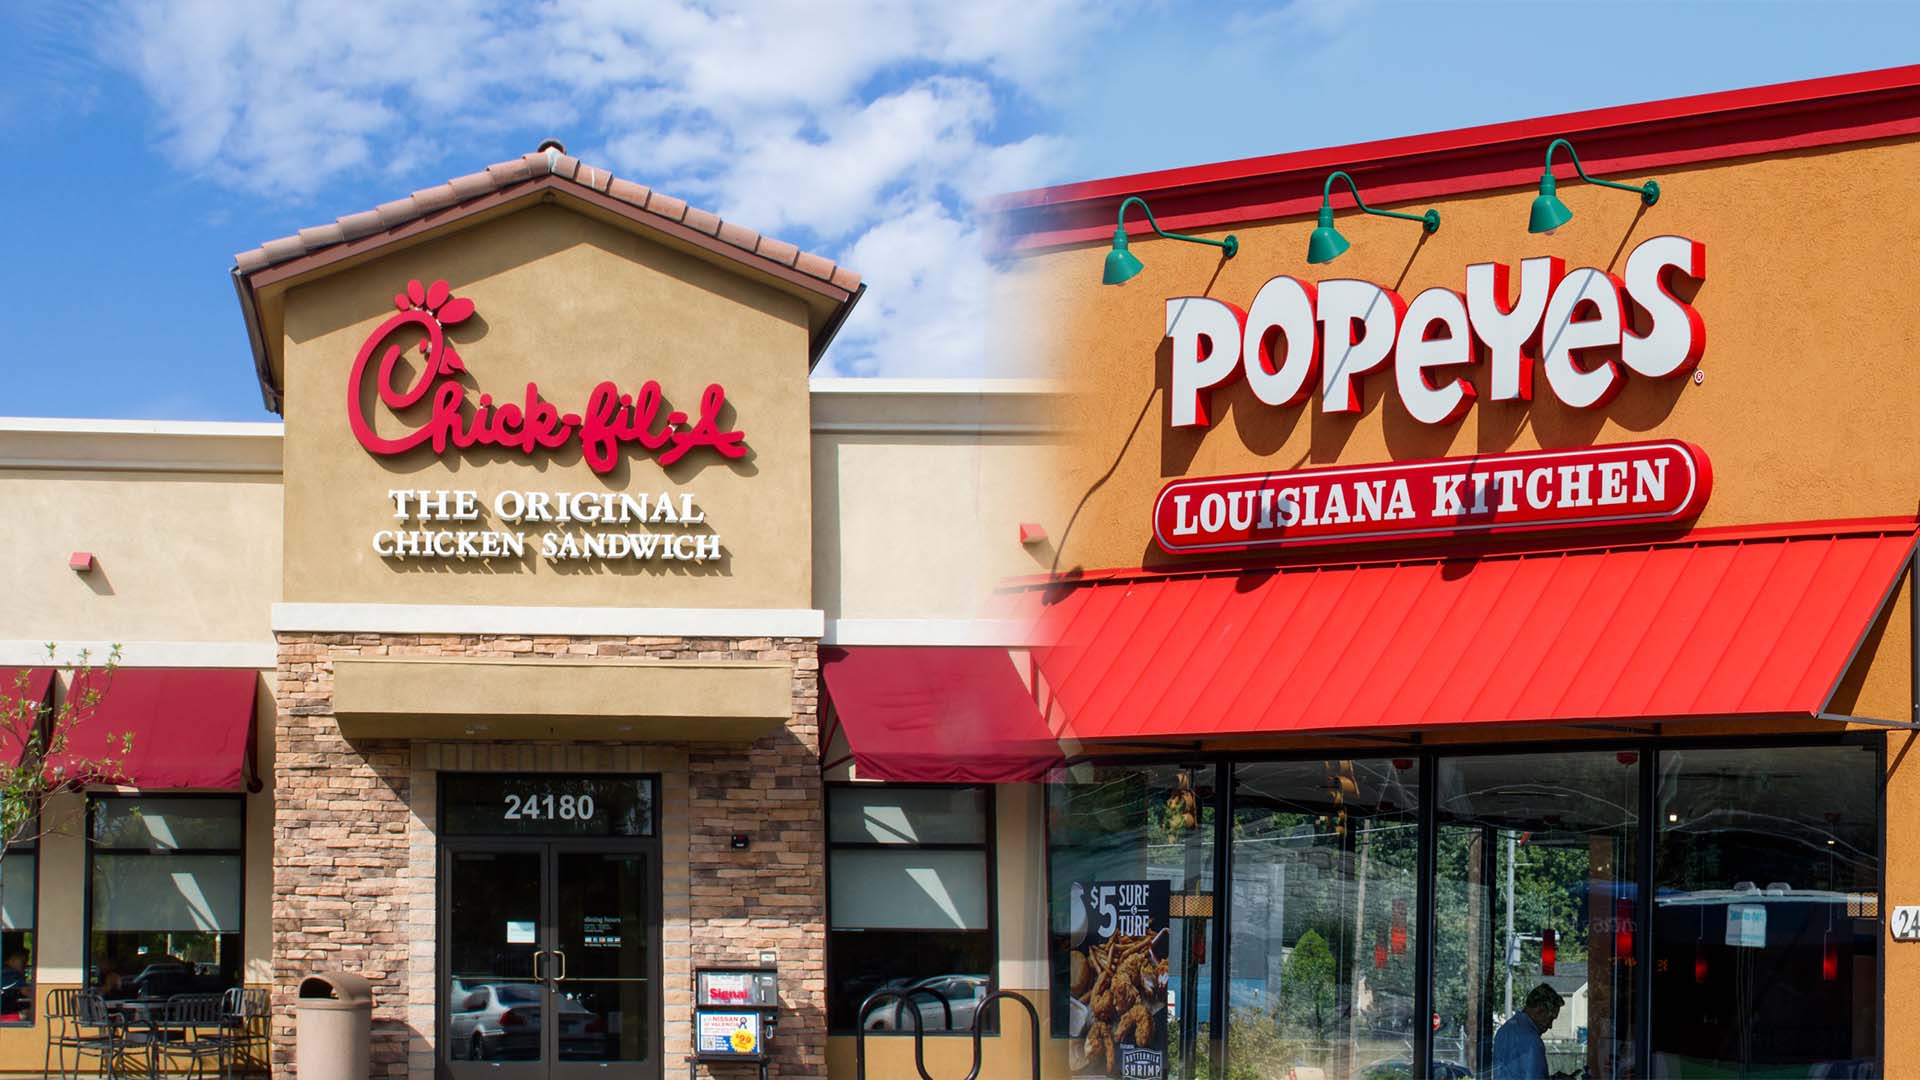 Popeyes is taking a page out of Taylor Swift's songwriting book and calling out its competitor in an ad inspired by the pop star that has a hidden dig at Chick-fil-A: The fast-food giant is showing their appreciation for their customers